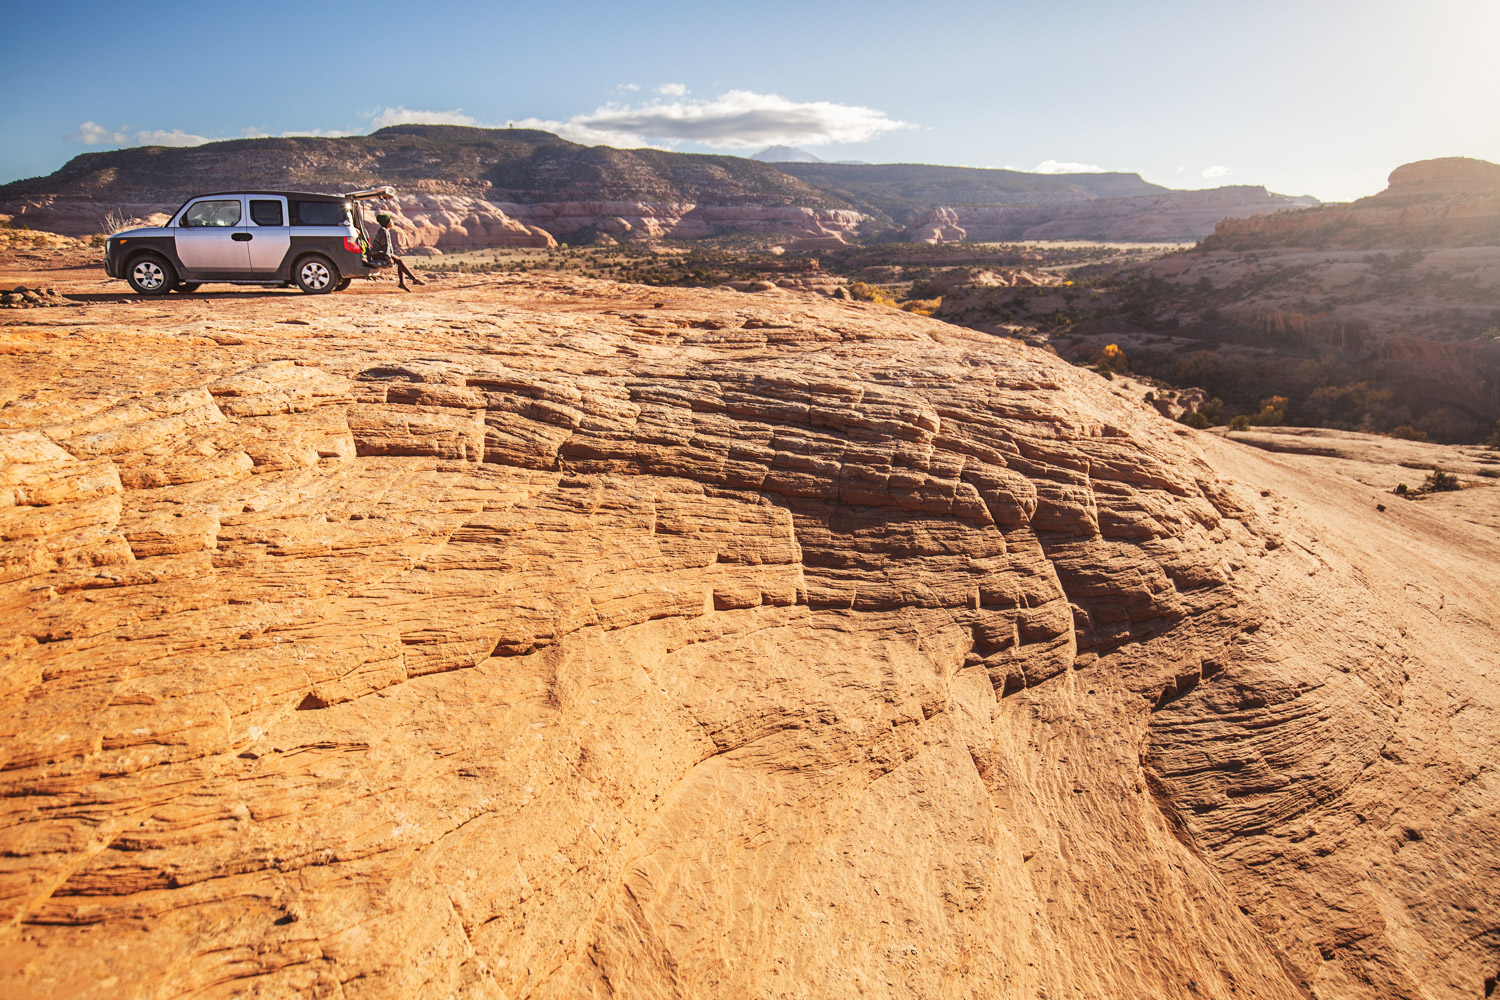 The Hotelement (Honda Element) parked in Moab, Utah